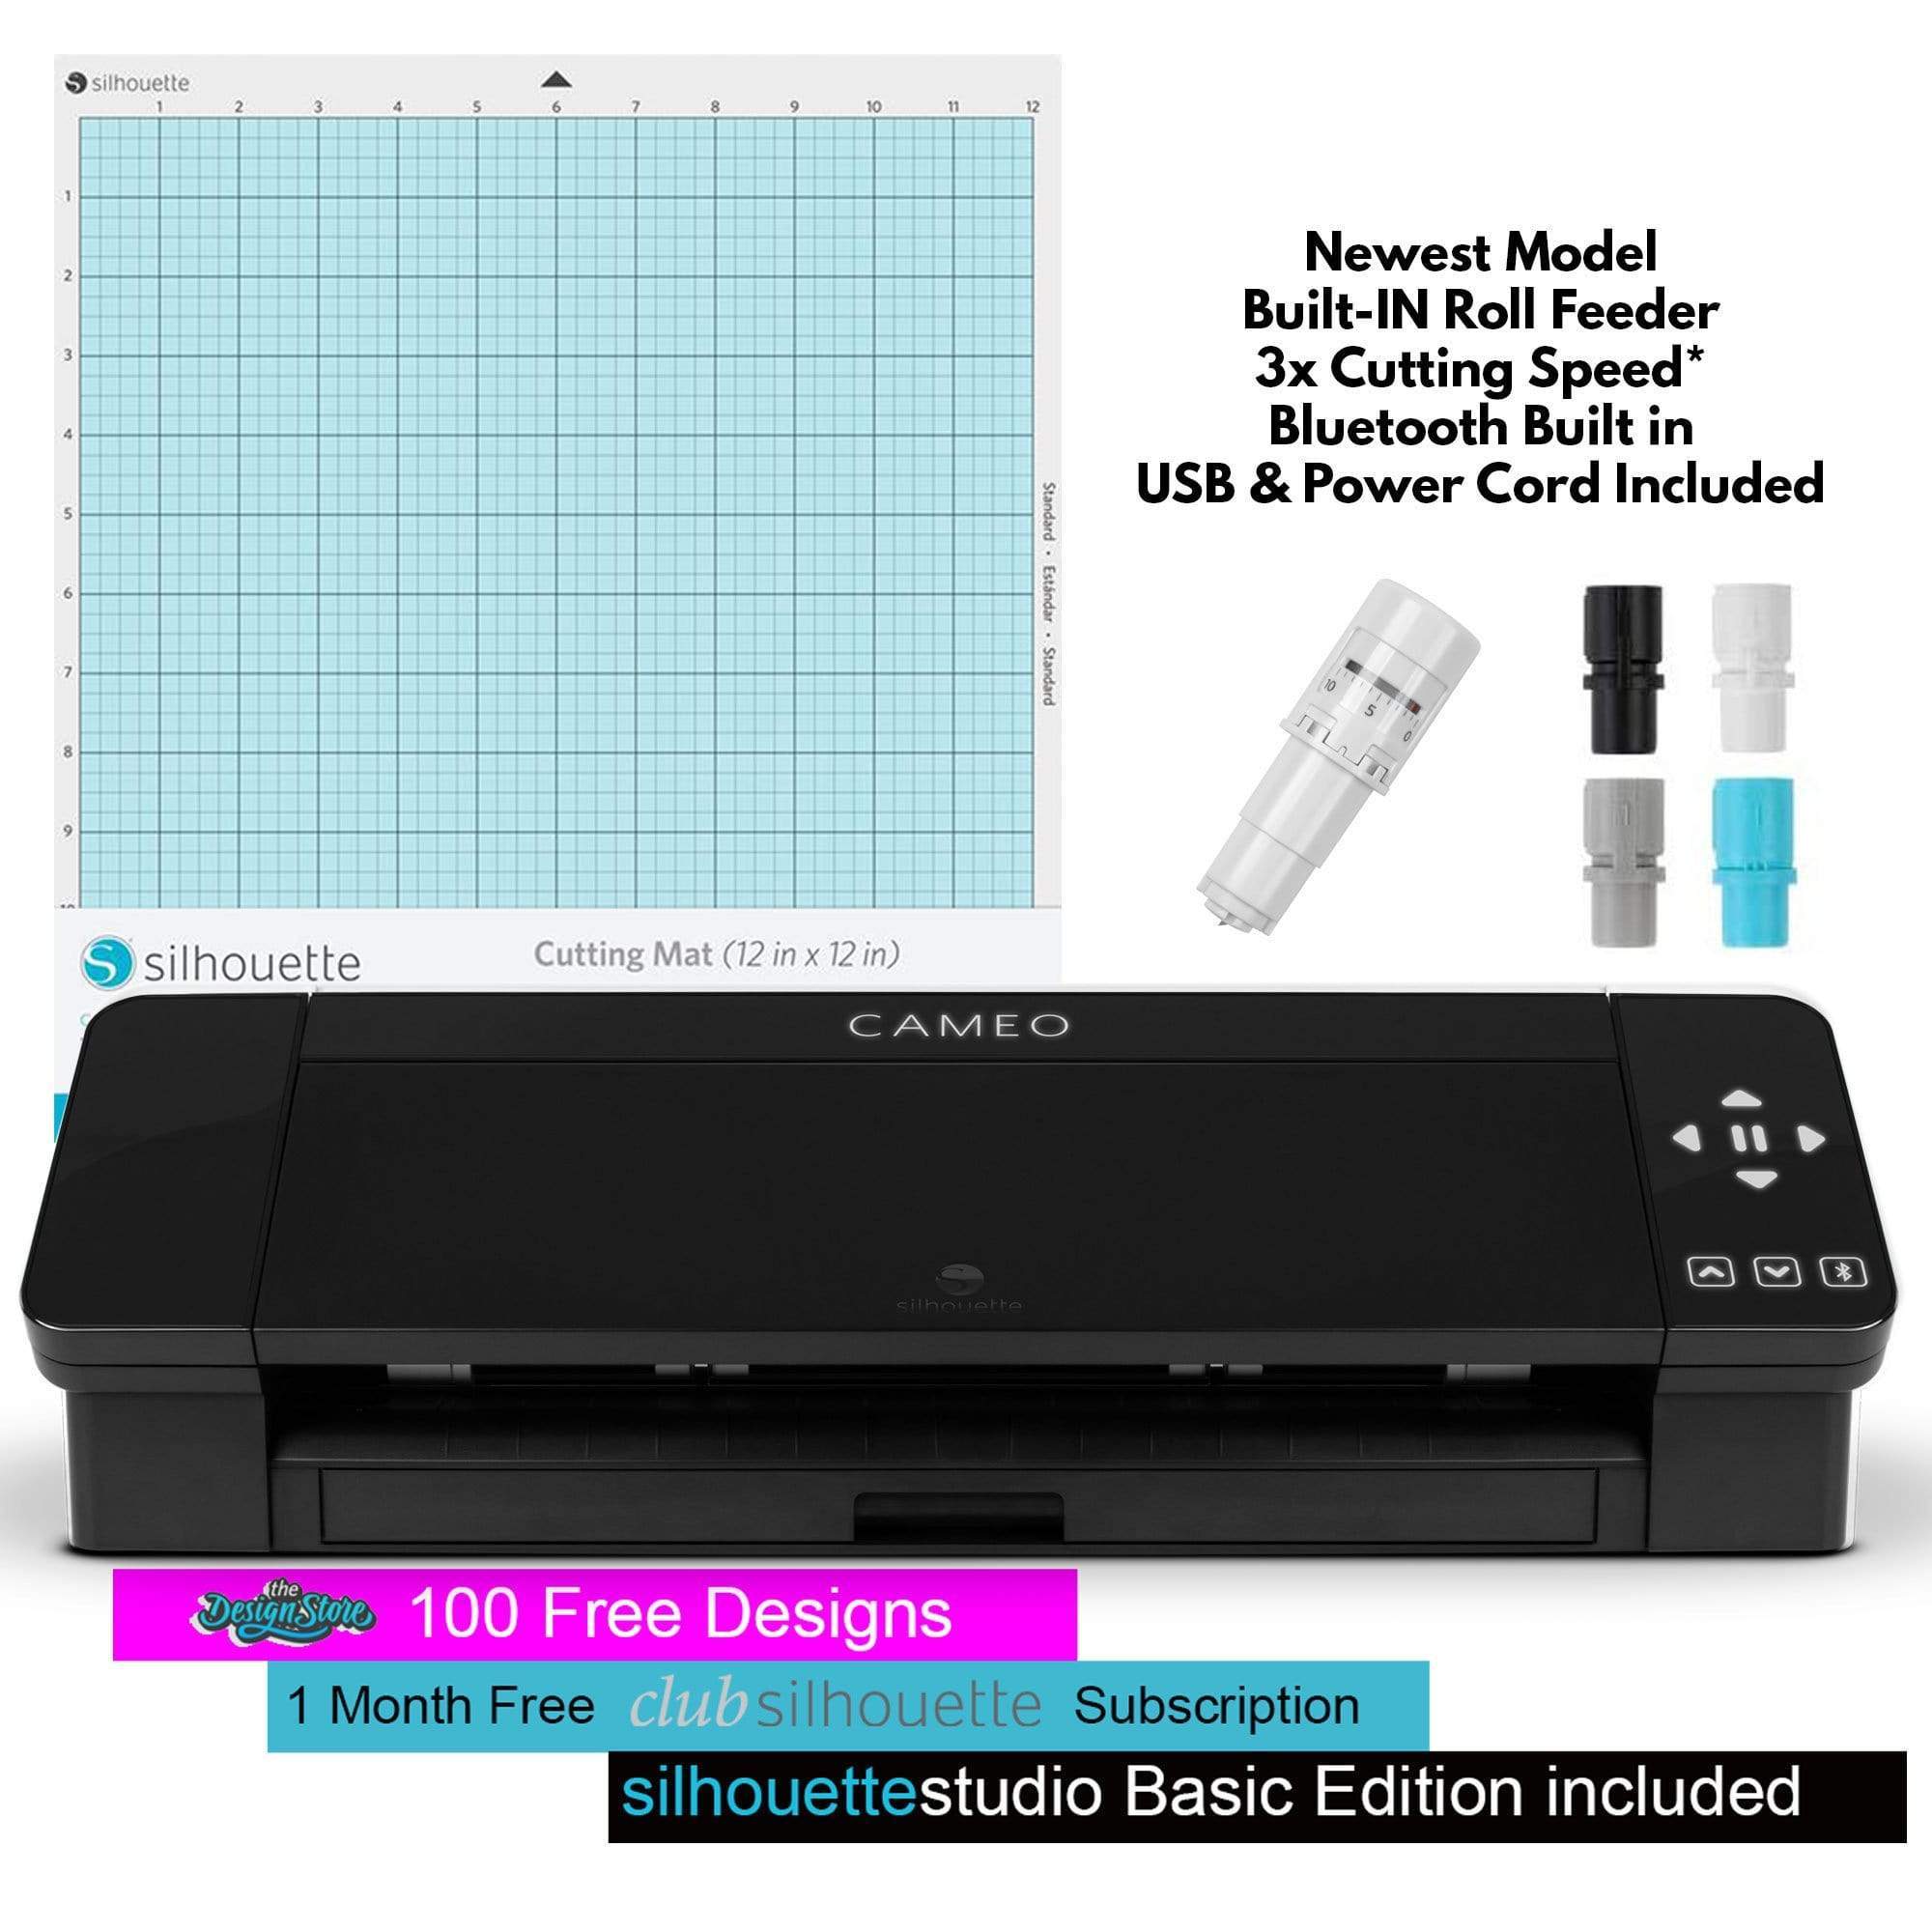 Silhouette America Craft Cutters Silhouette Cameo 4 Vinyl Cutting Machine 12" Black Edition- Reconditioned